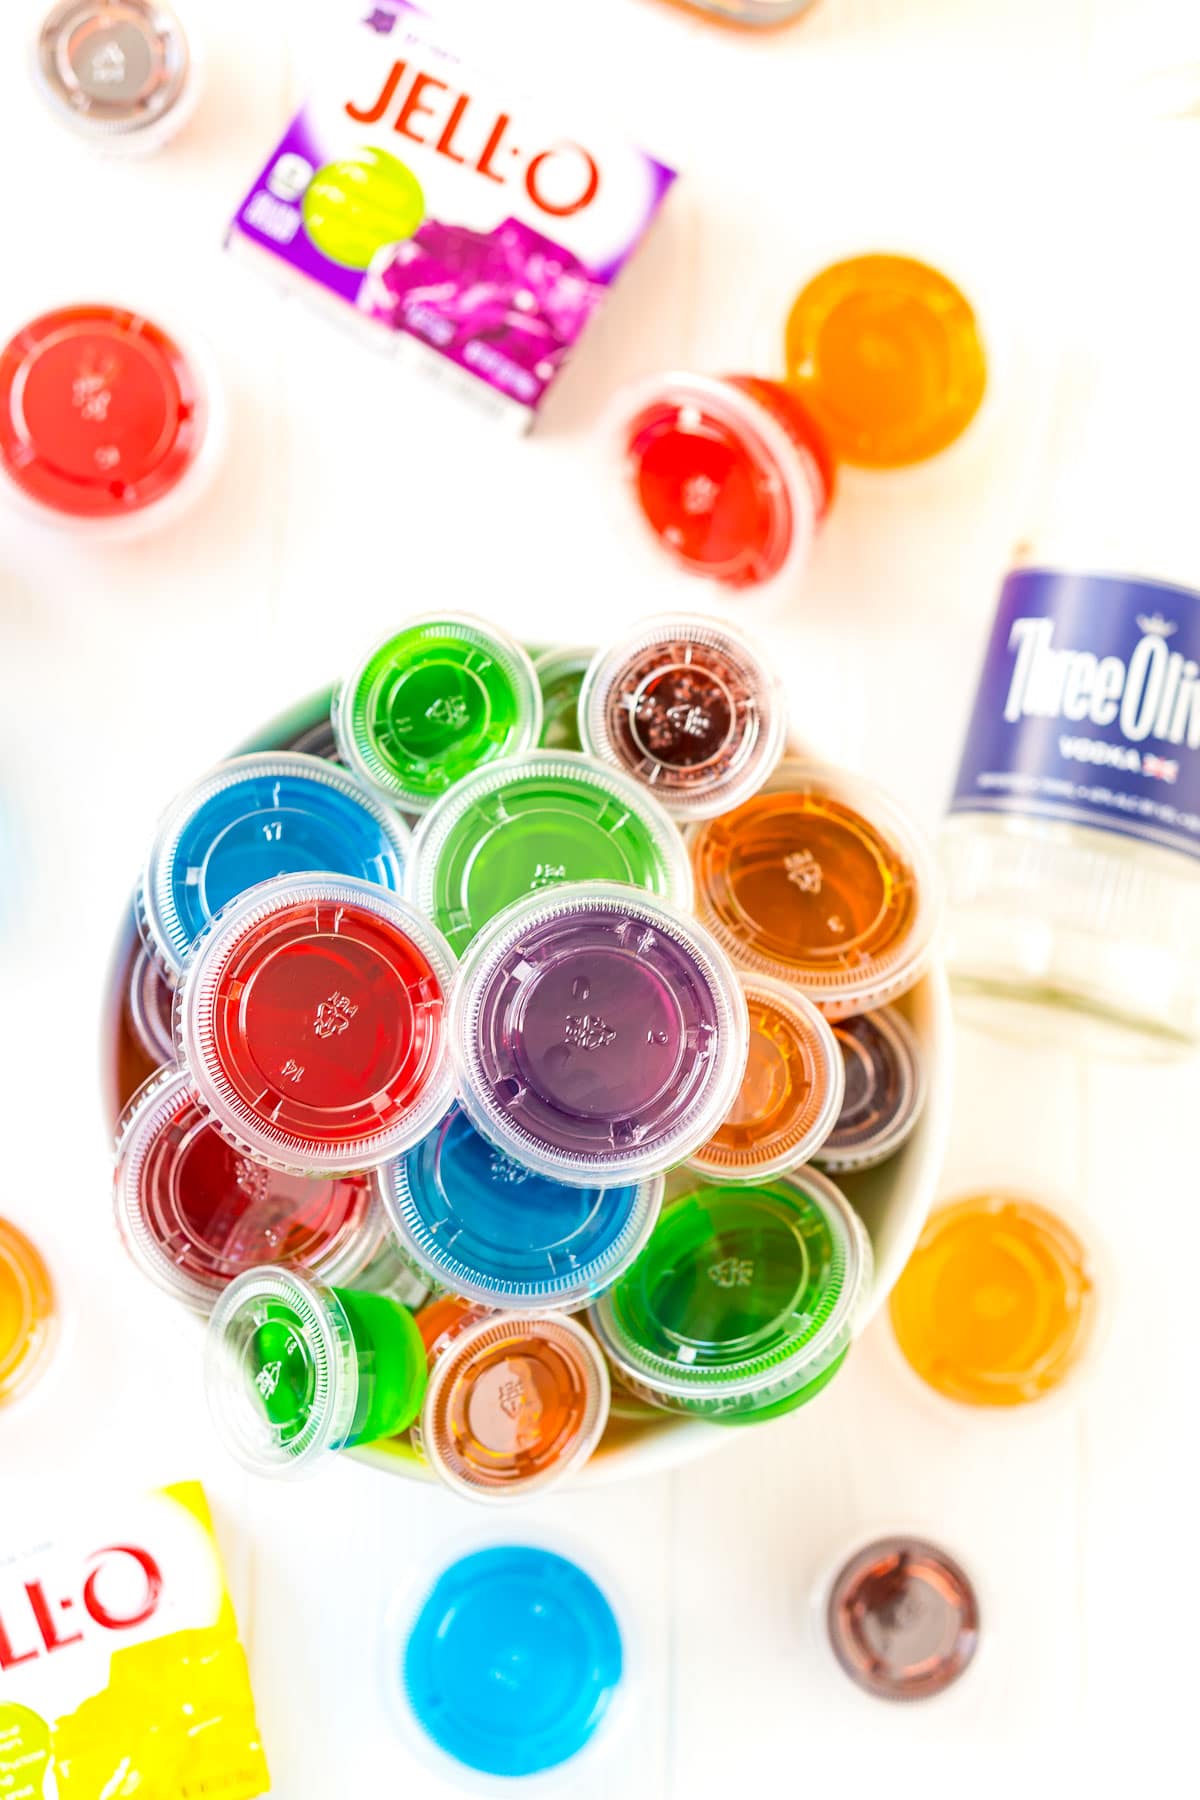 Bowl full of multi-colored jello shots with more jello shots, boxes of Jell-O, and a bottle of vodka around it.